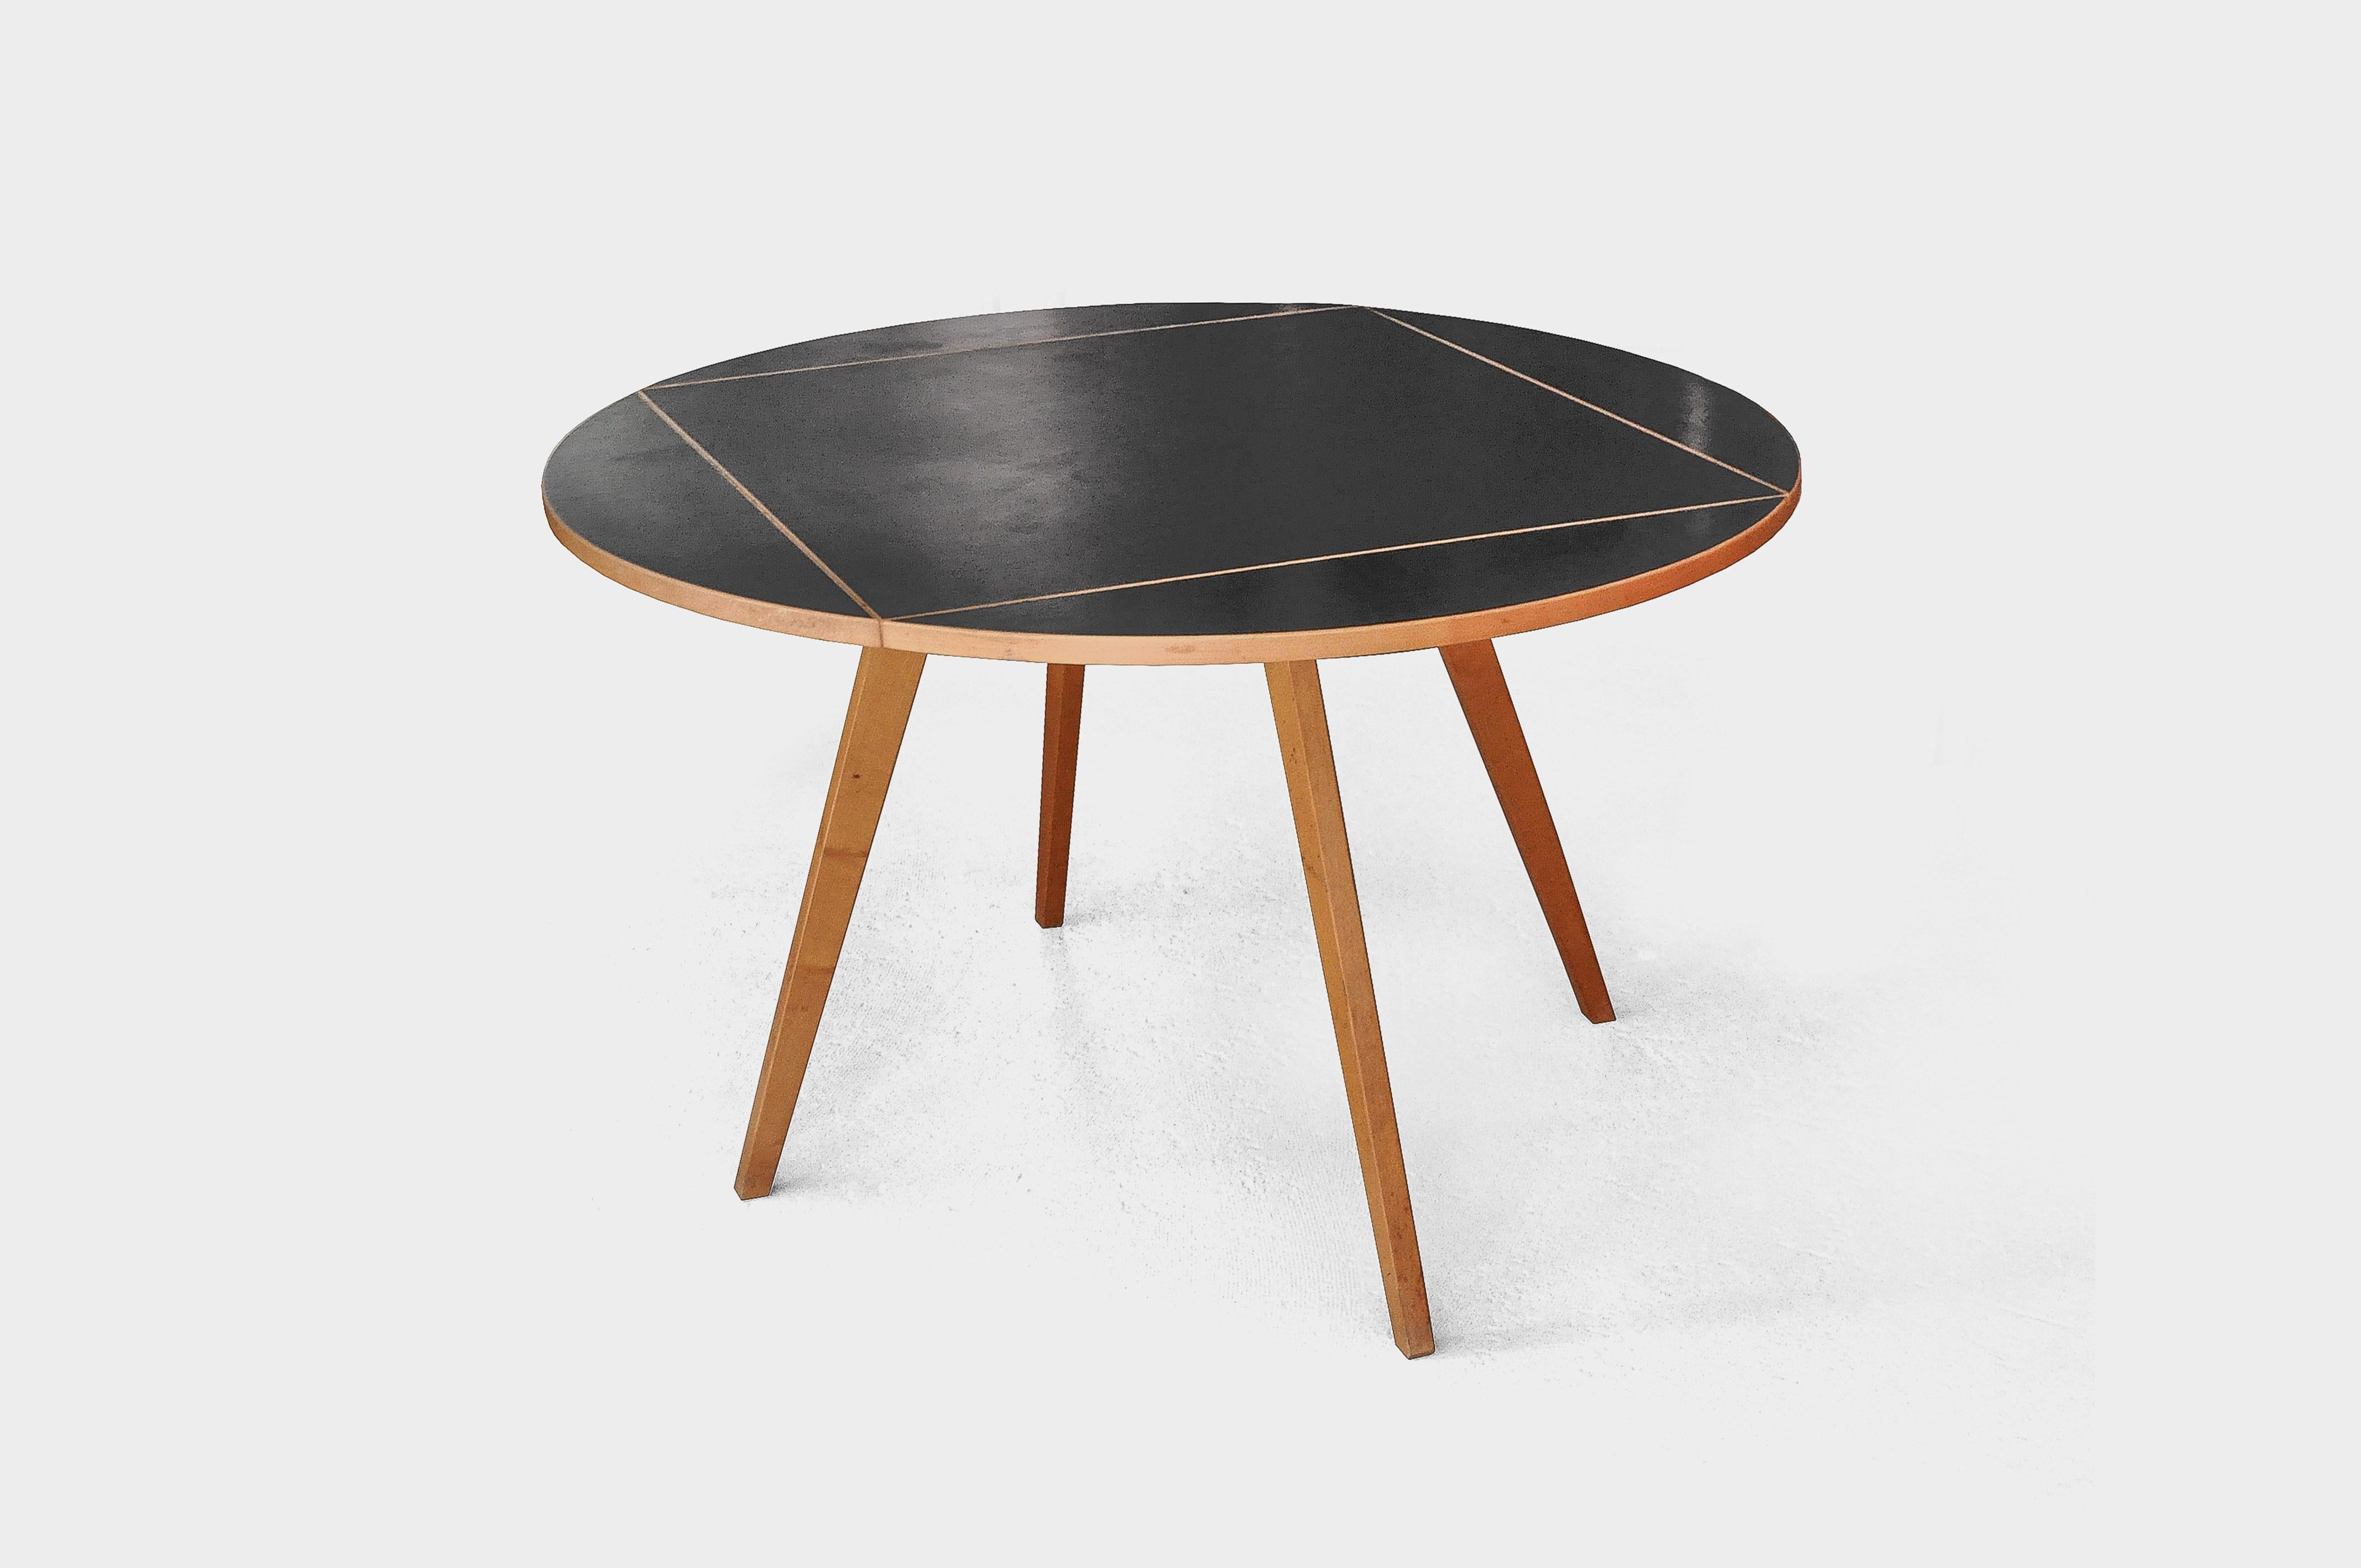 Dining table by Max Bill for Horgen Glarus. The table top can be changed from a round to a square shape by turning it. This table is one of Max Bill's most important designs and the translation of his idea of concrete art into furniture design. It